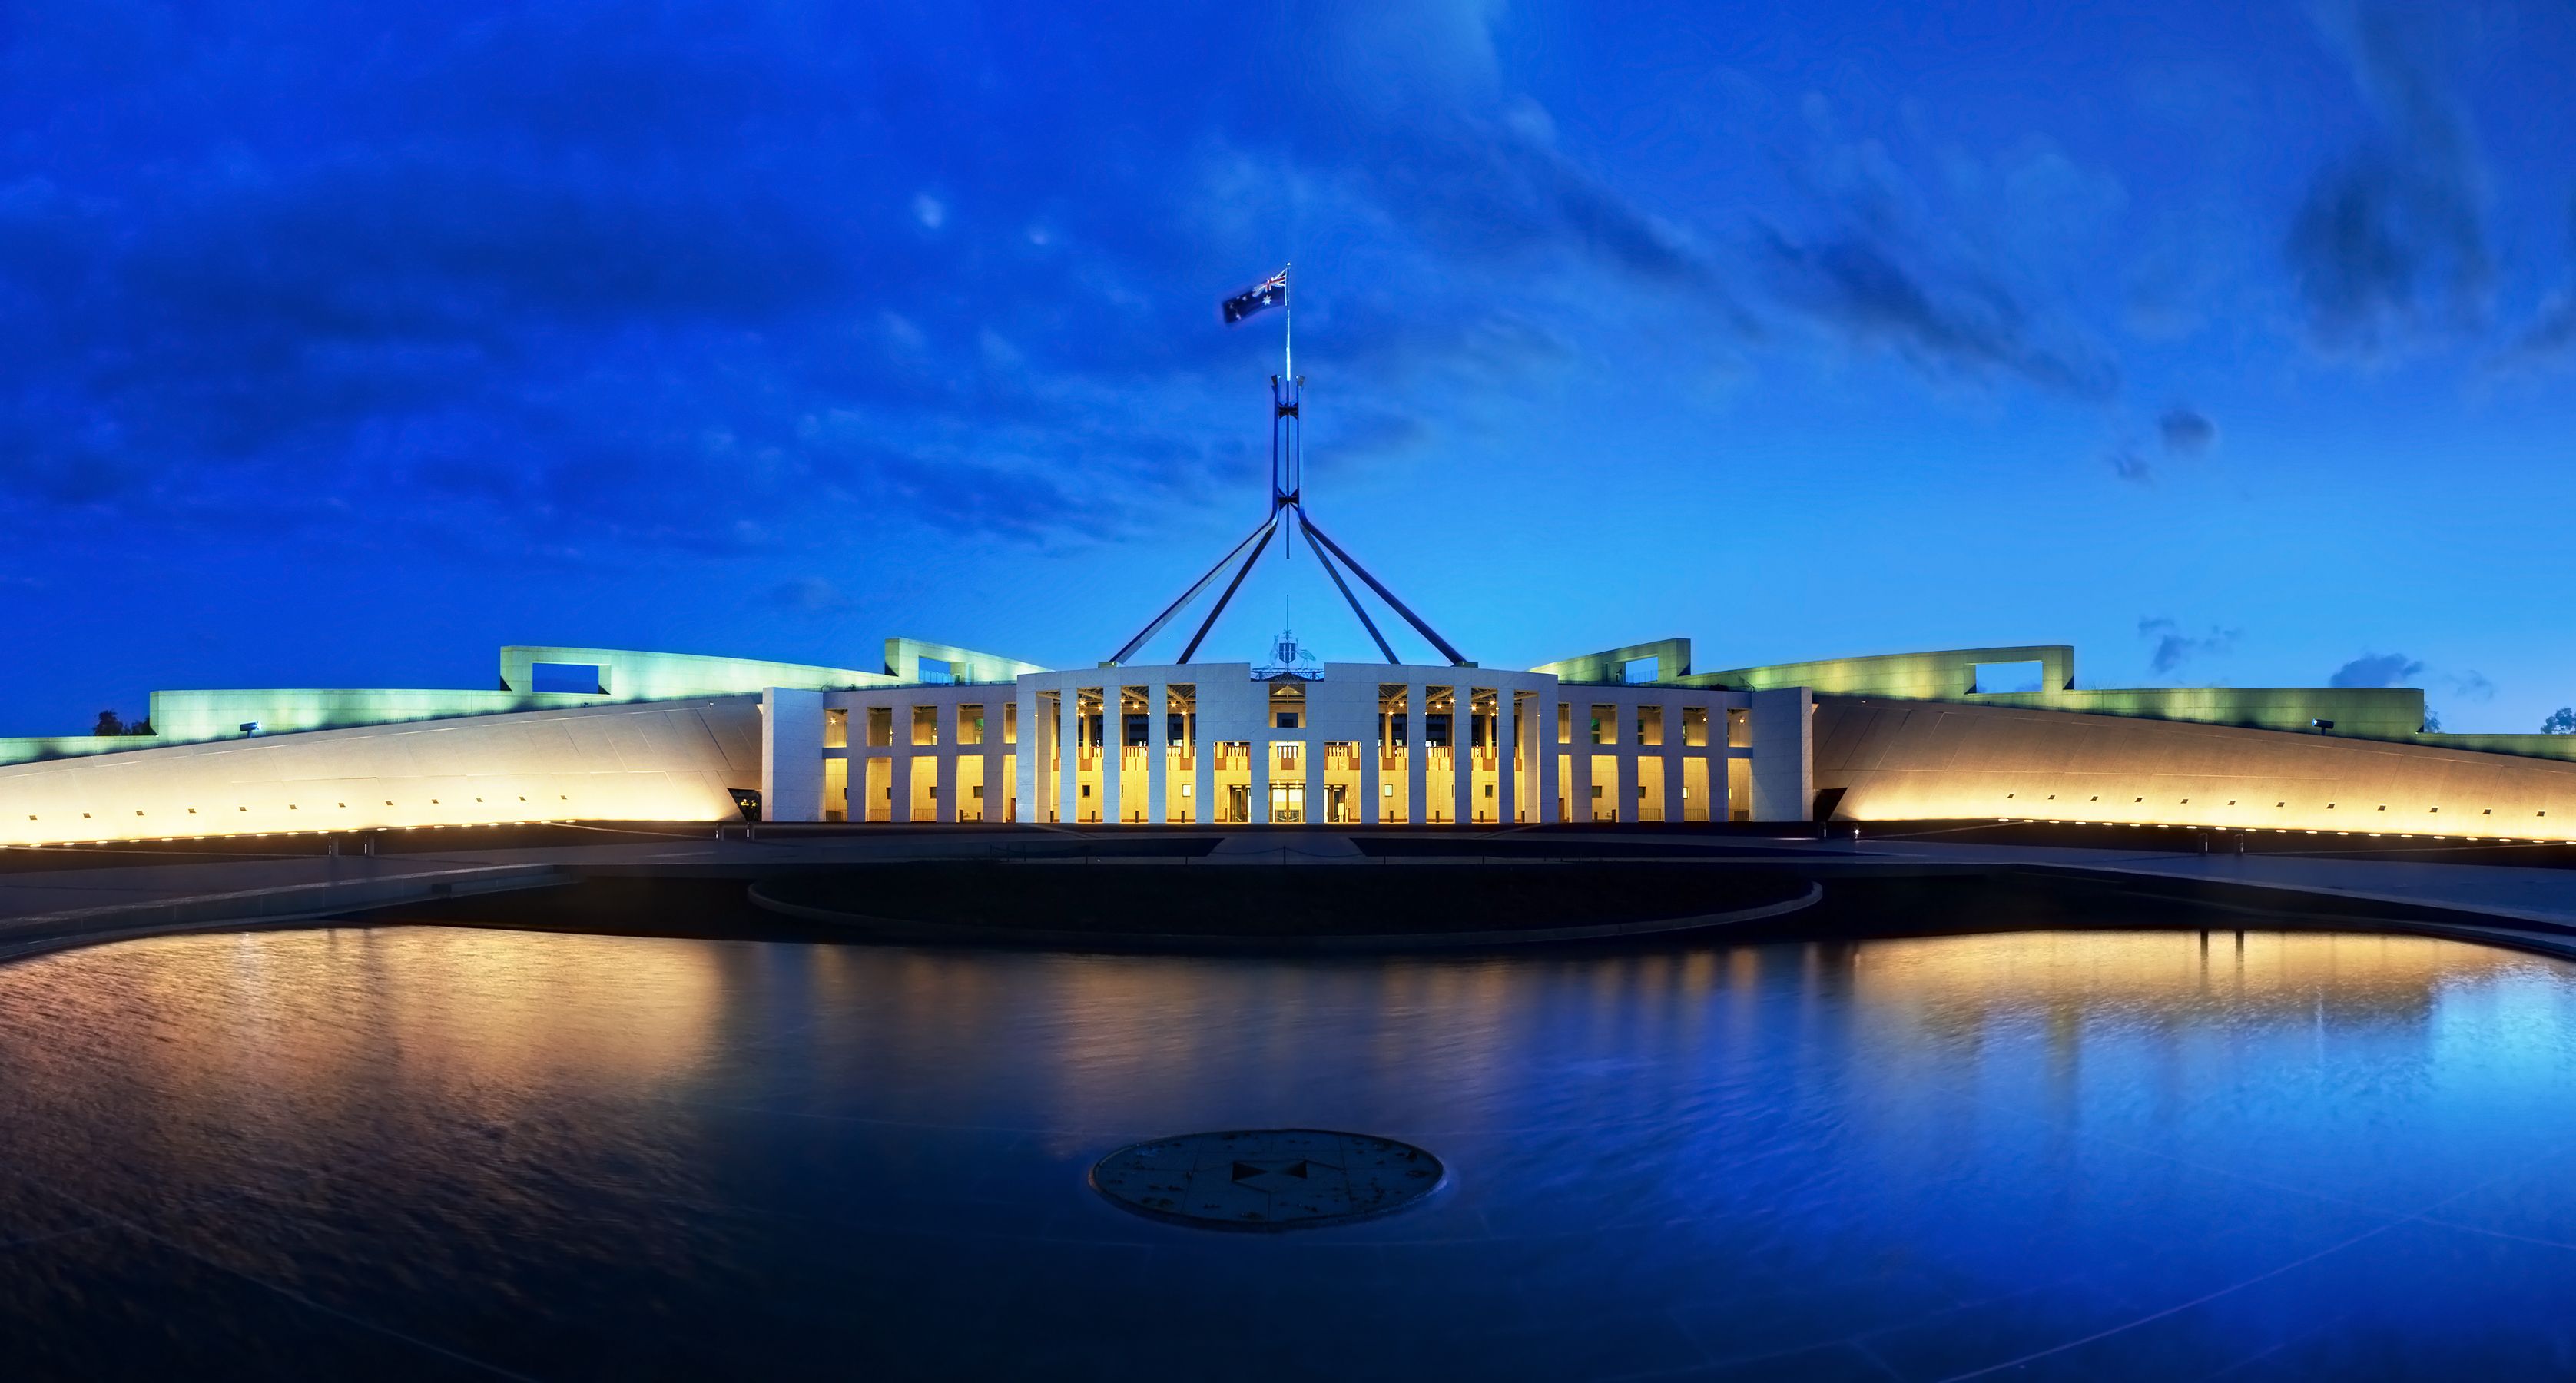 File:Parliament House Canberra Dusk Panorama.jpg - Wikimedia Commons